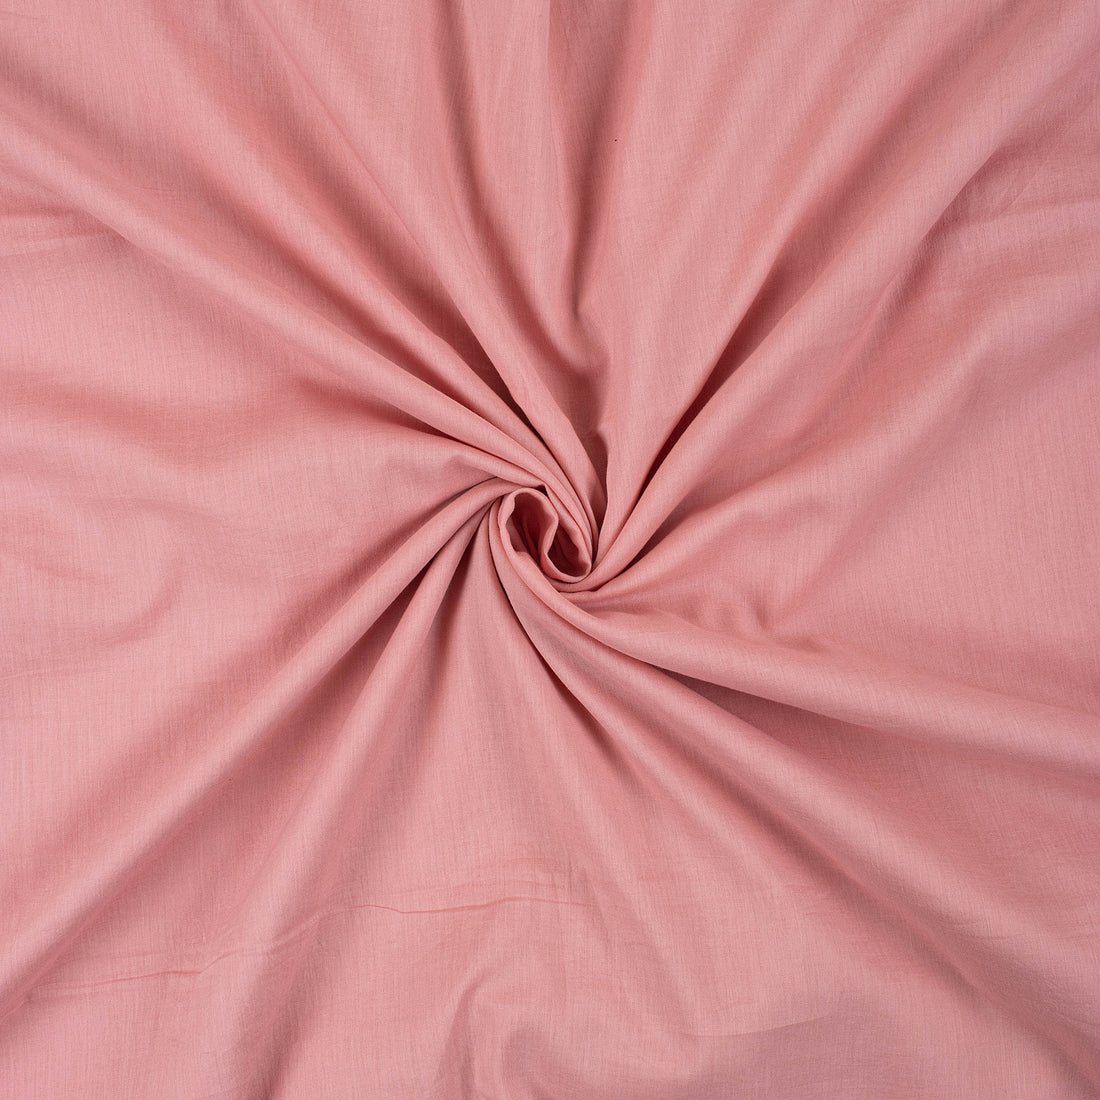 Organic Dyed Solid Plain Cotton Fabric